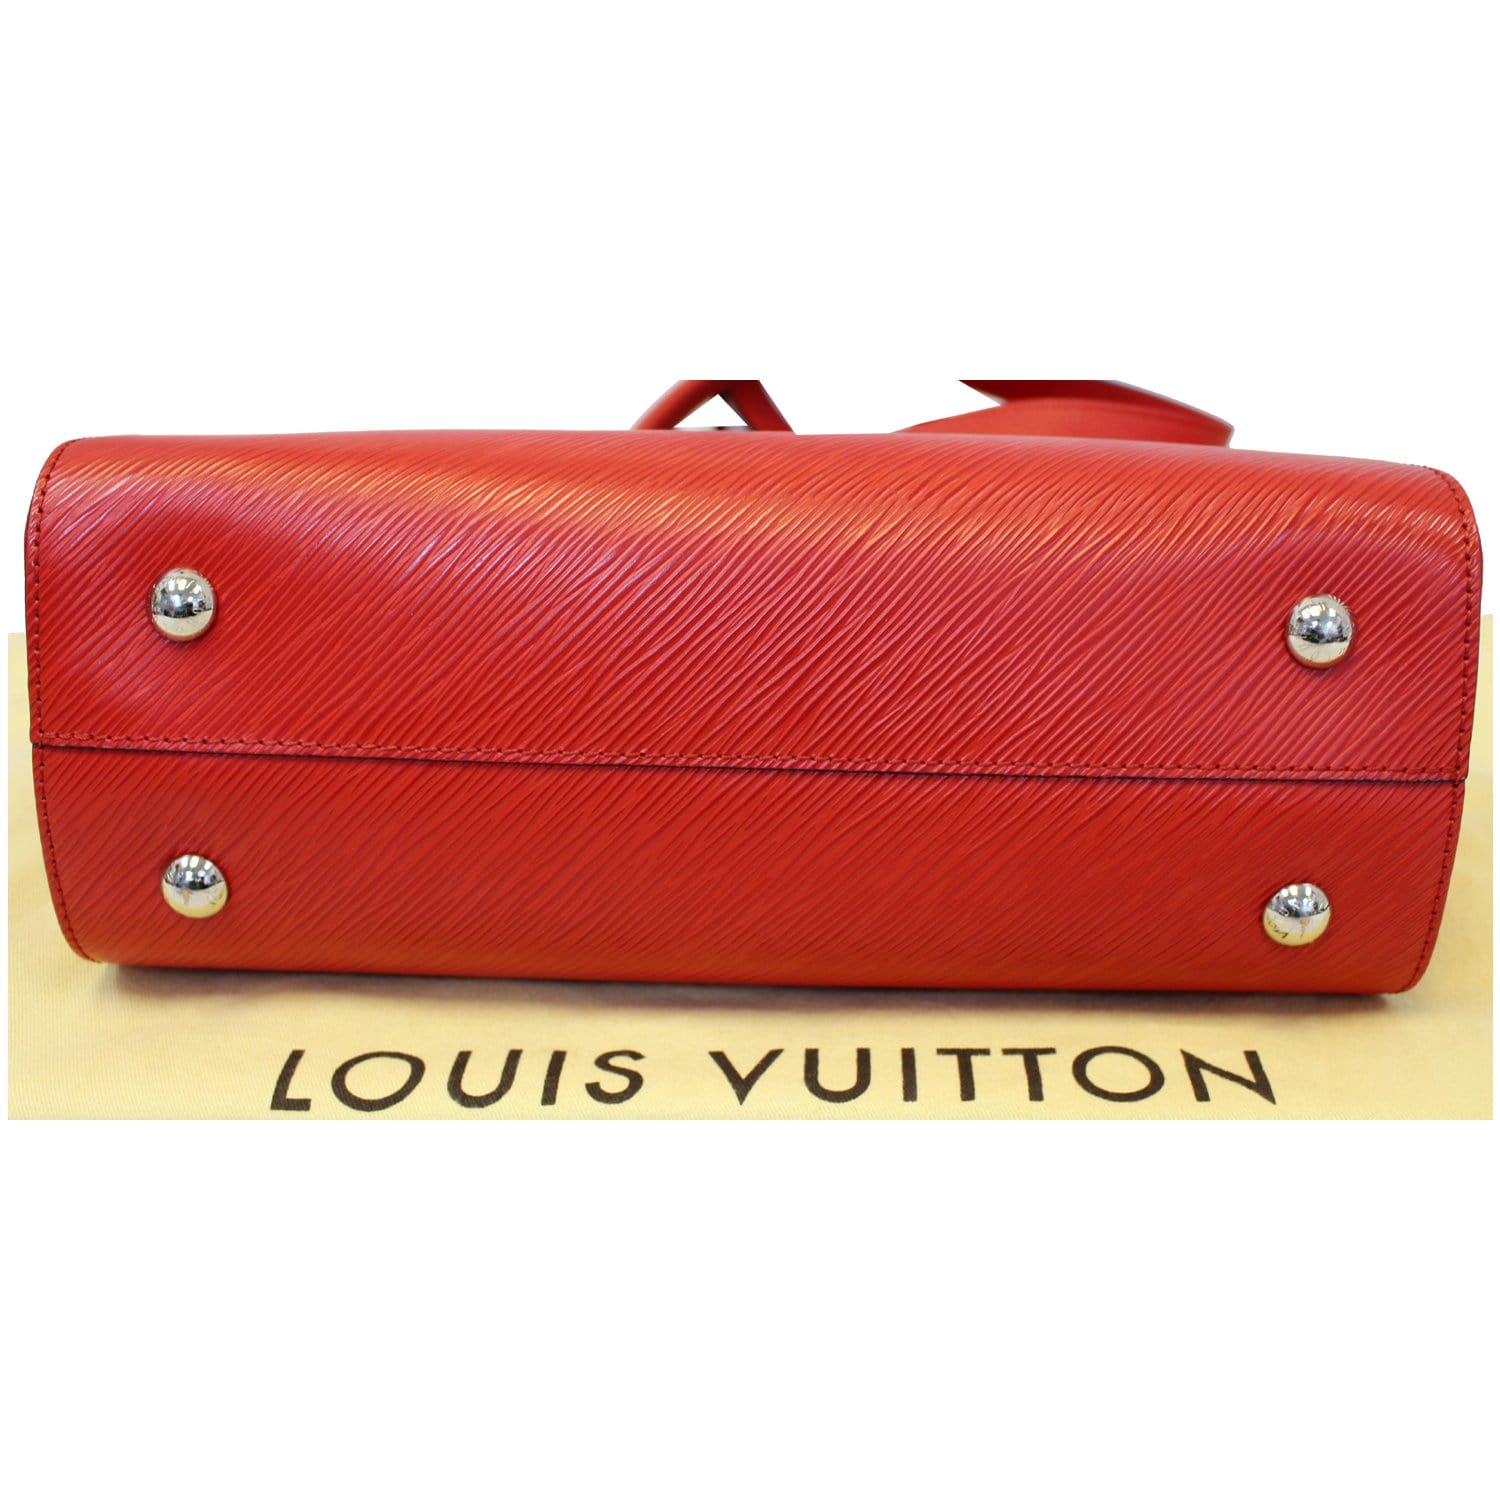 Louis Vuitton Red Epi Leather Twisted Tote Bag, myGemma, SG